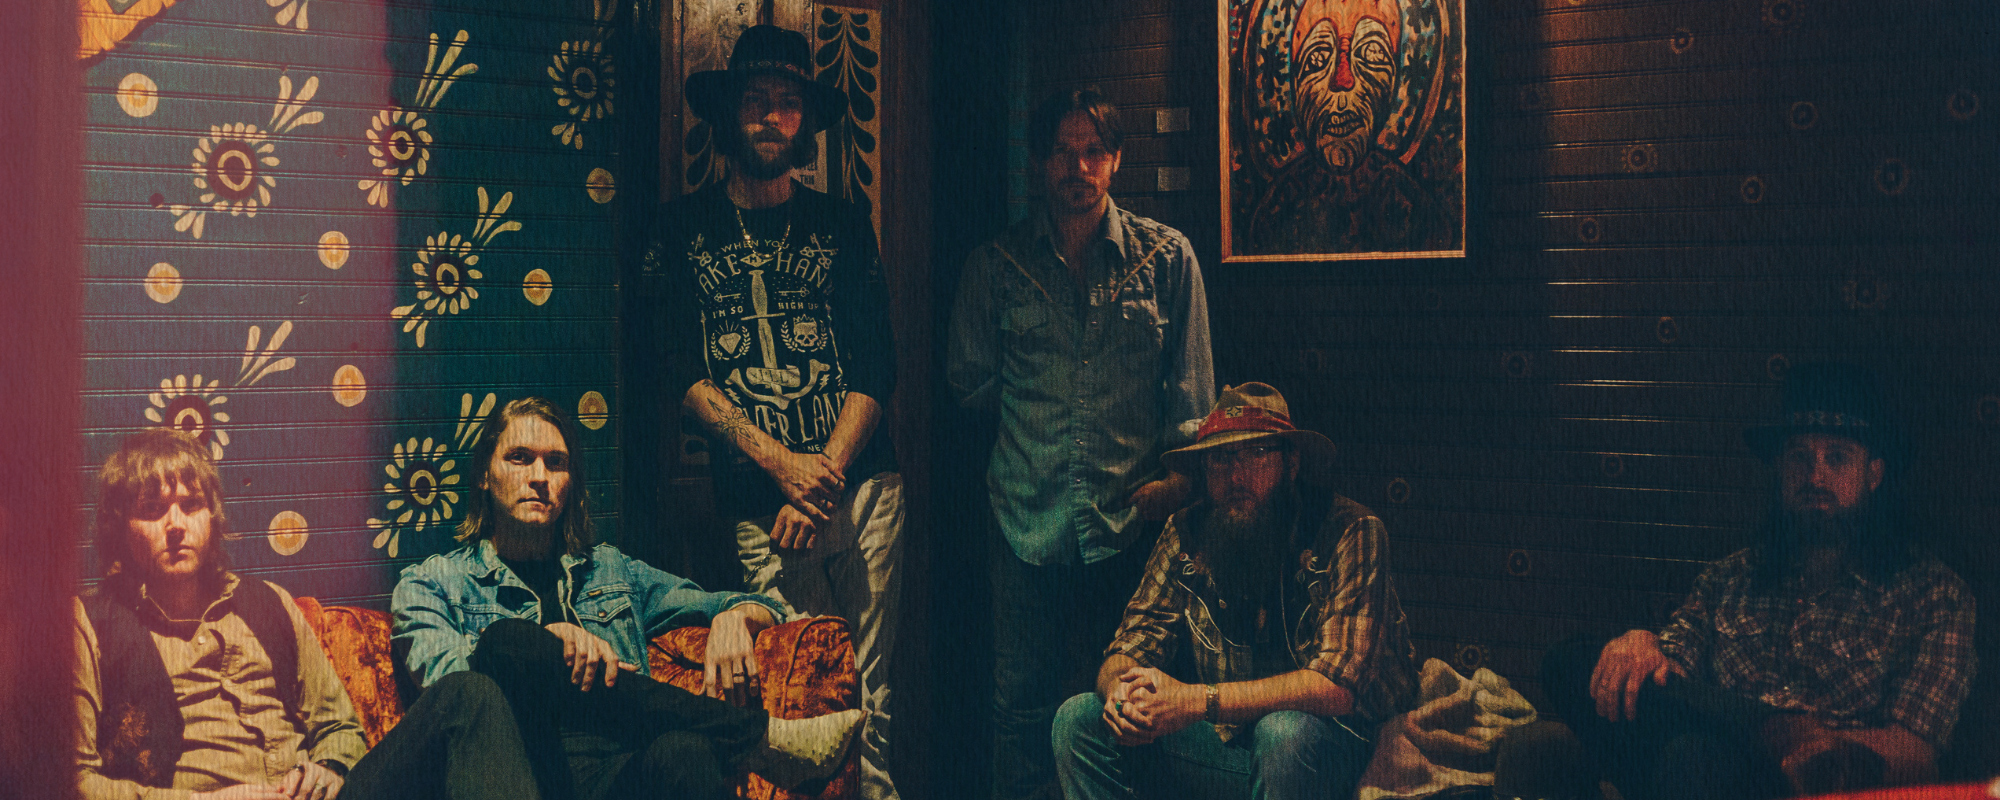 Whiskey Myers Introduces New Coffee Collaboration While Waiting on New Album